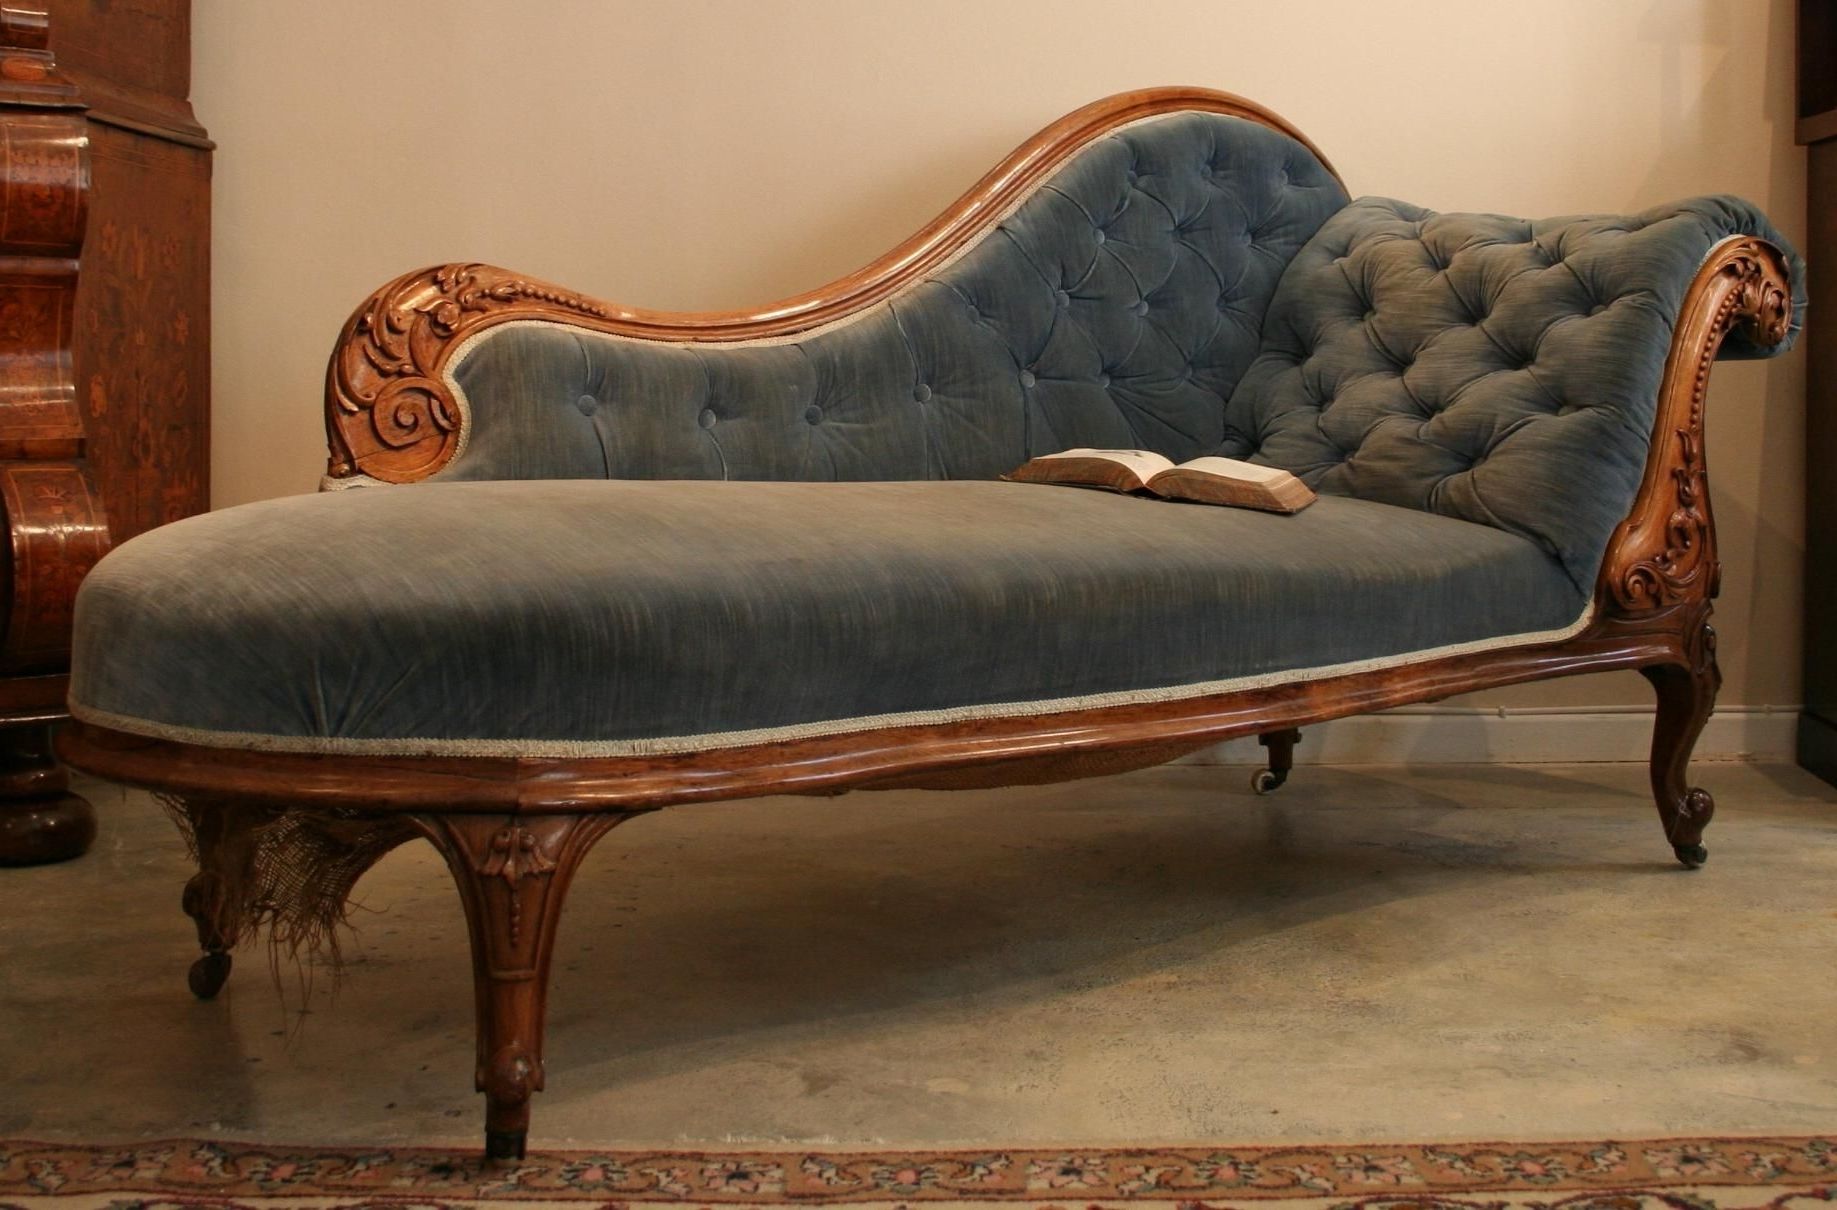 Chaise Lounges, Google Images And Fainting Couch With Regard To Victorian Chaise Lounge Chairs (View 5 of 15)